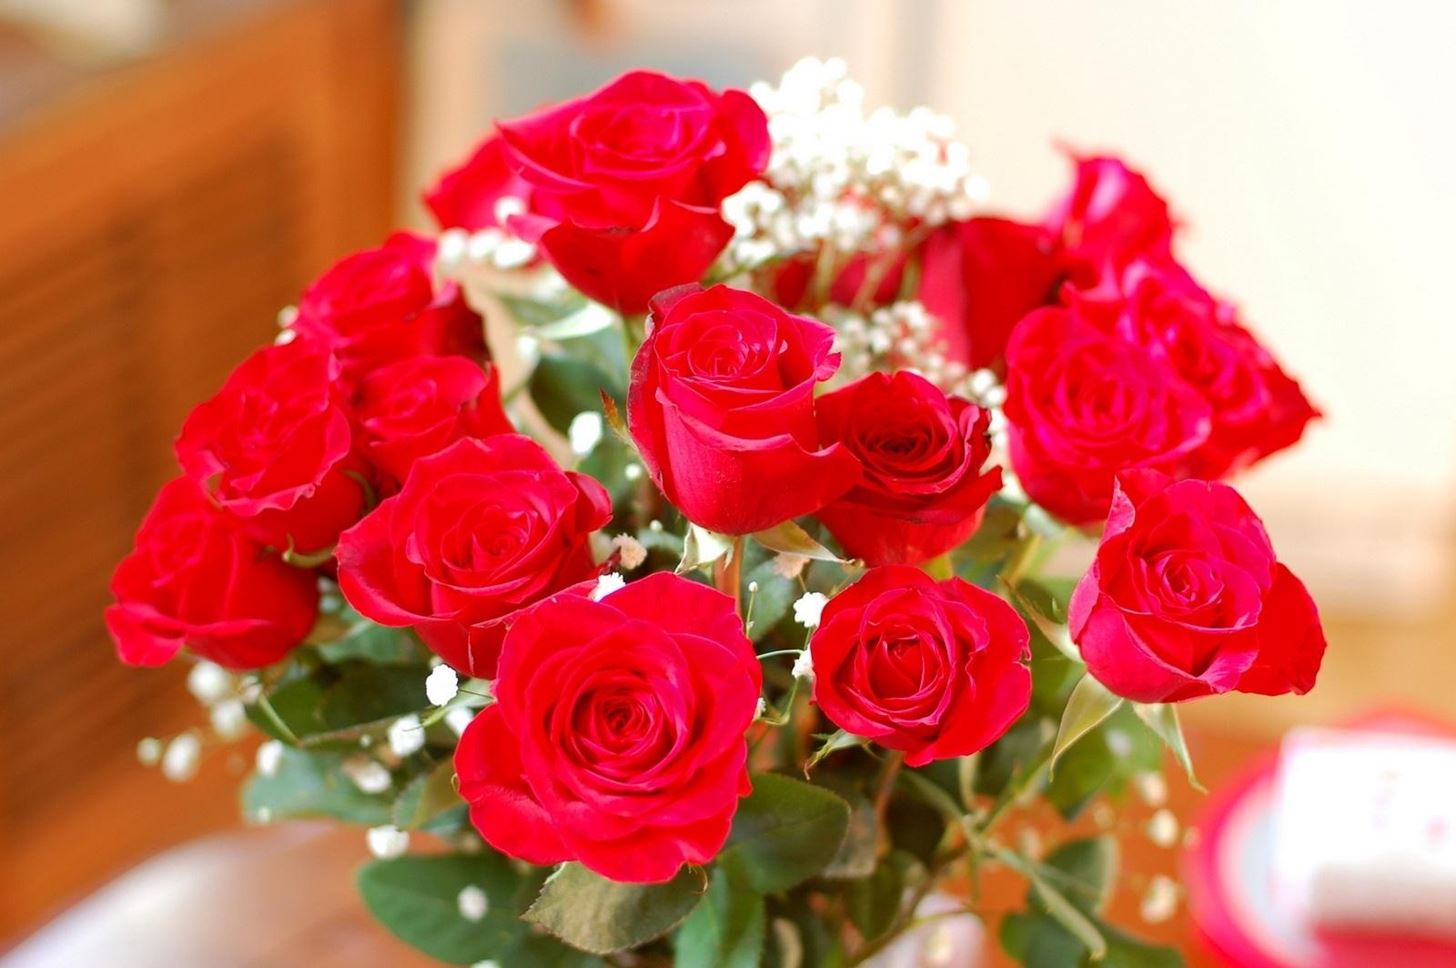 How to Spend Less on Last-Minute Valentine's Day Flowers for Your Girlfriend